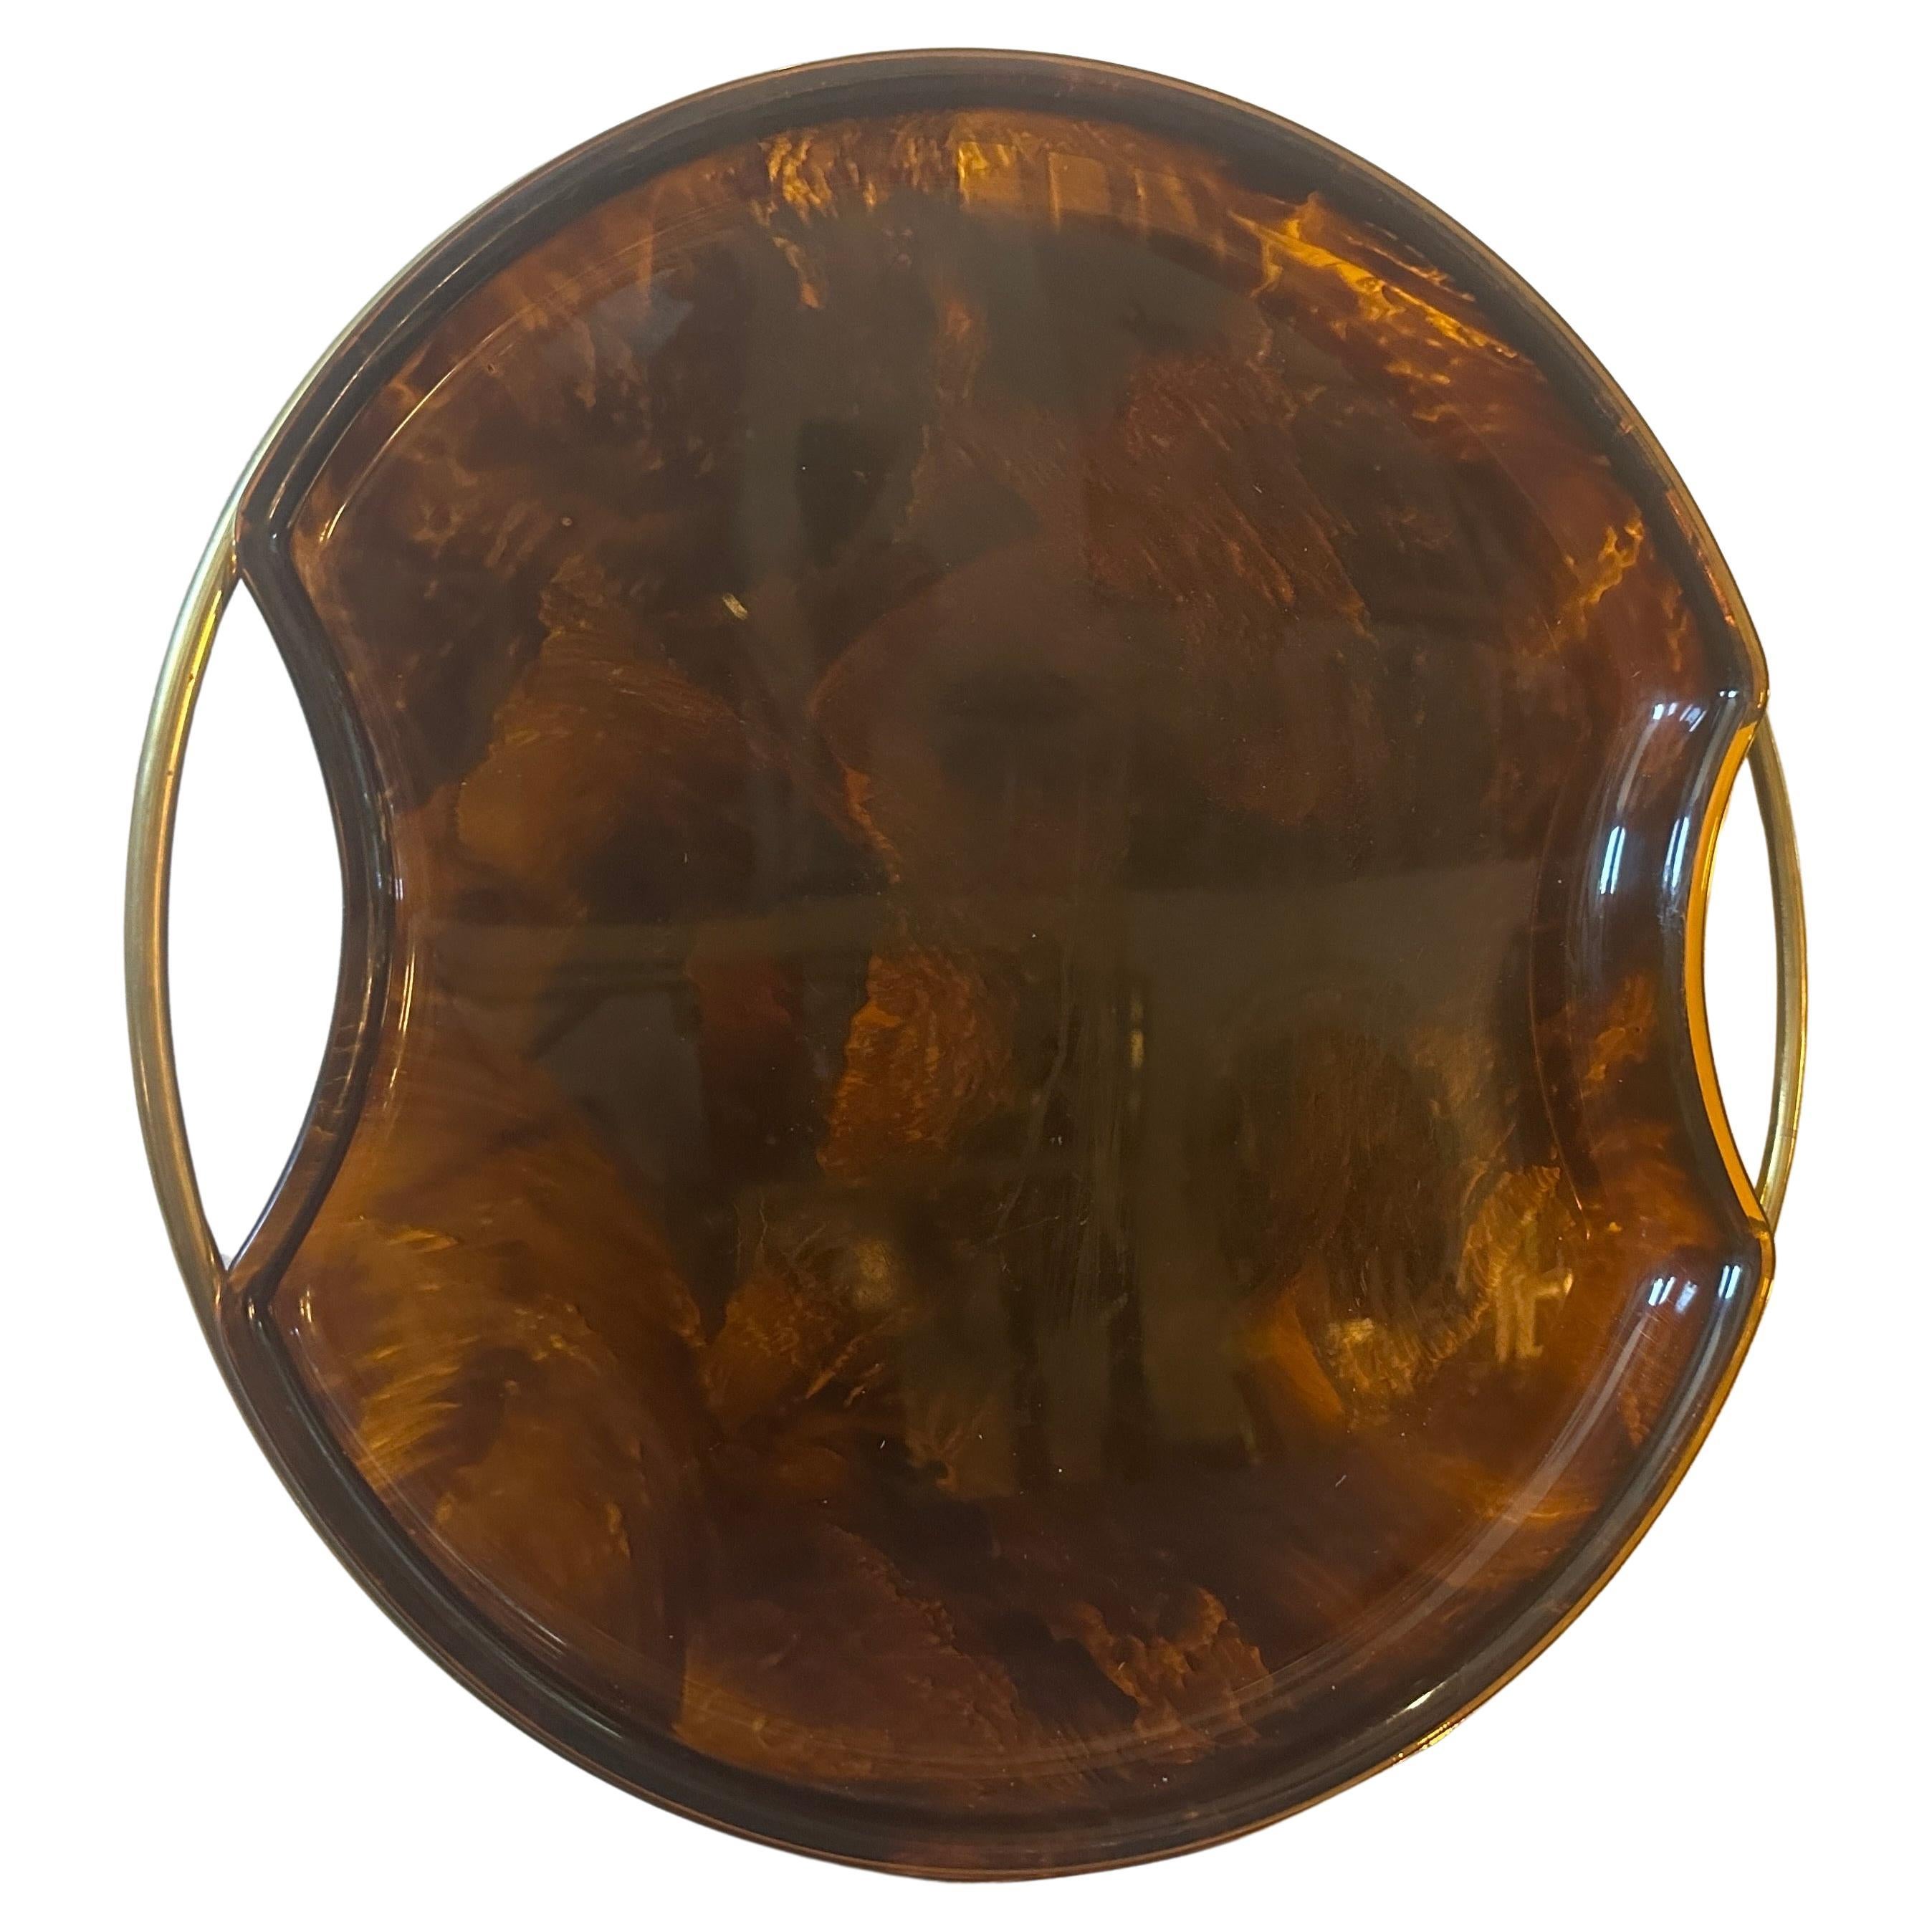 1970s Mid-Century Modern Brass and Fake Tortoise Lucite Round Tray by Guzzini For Sale